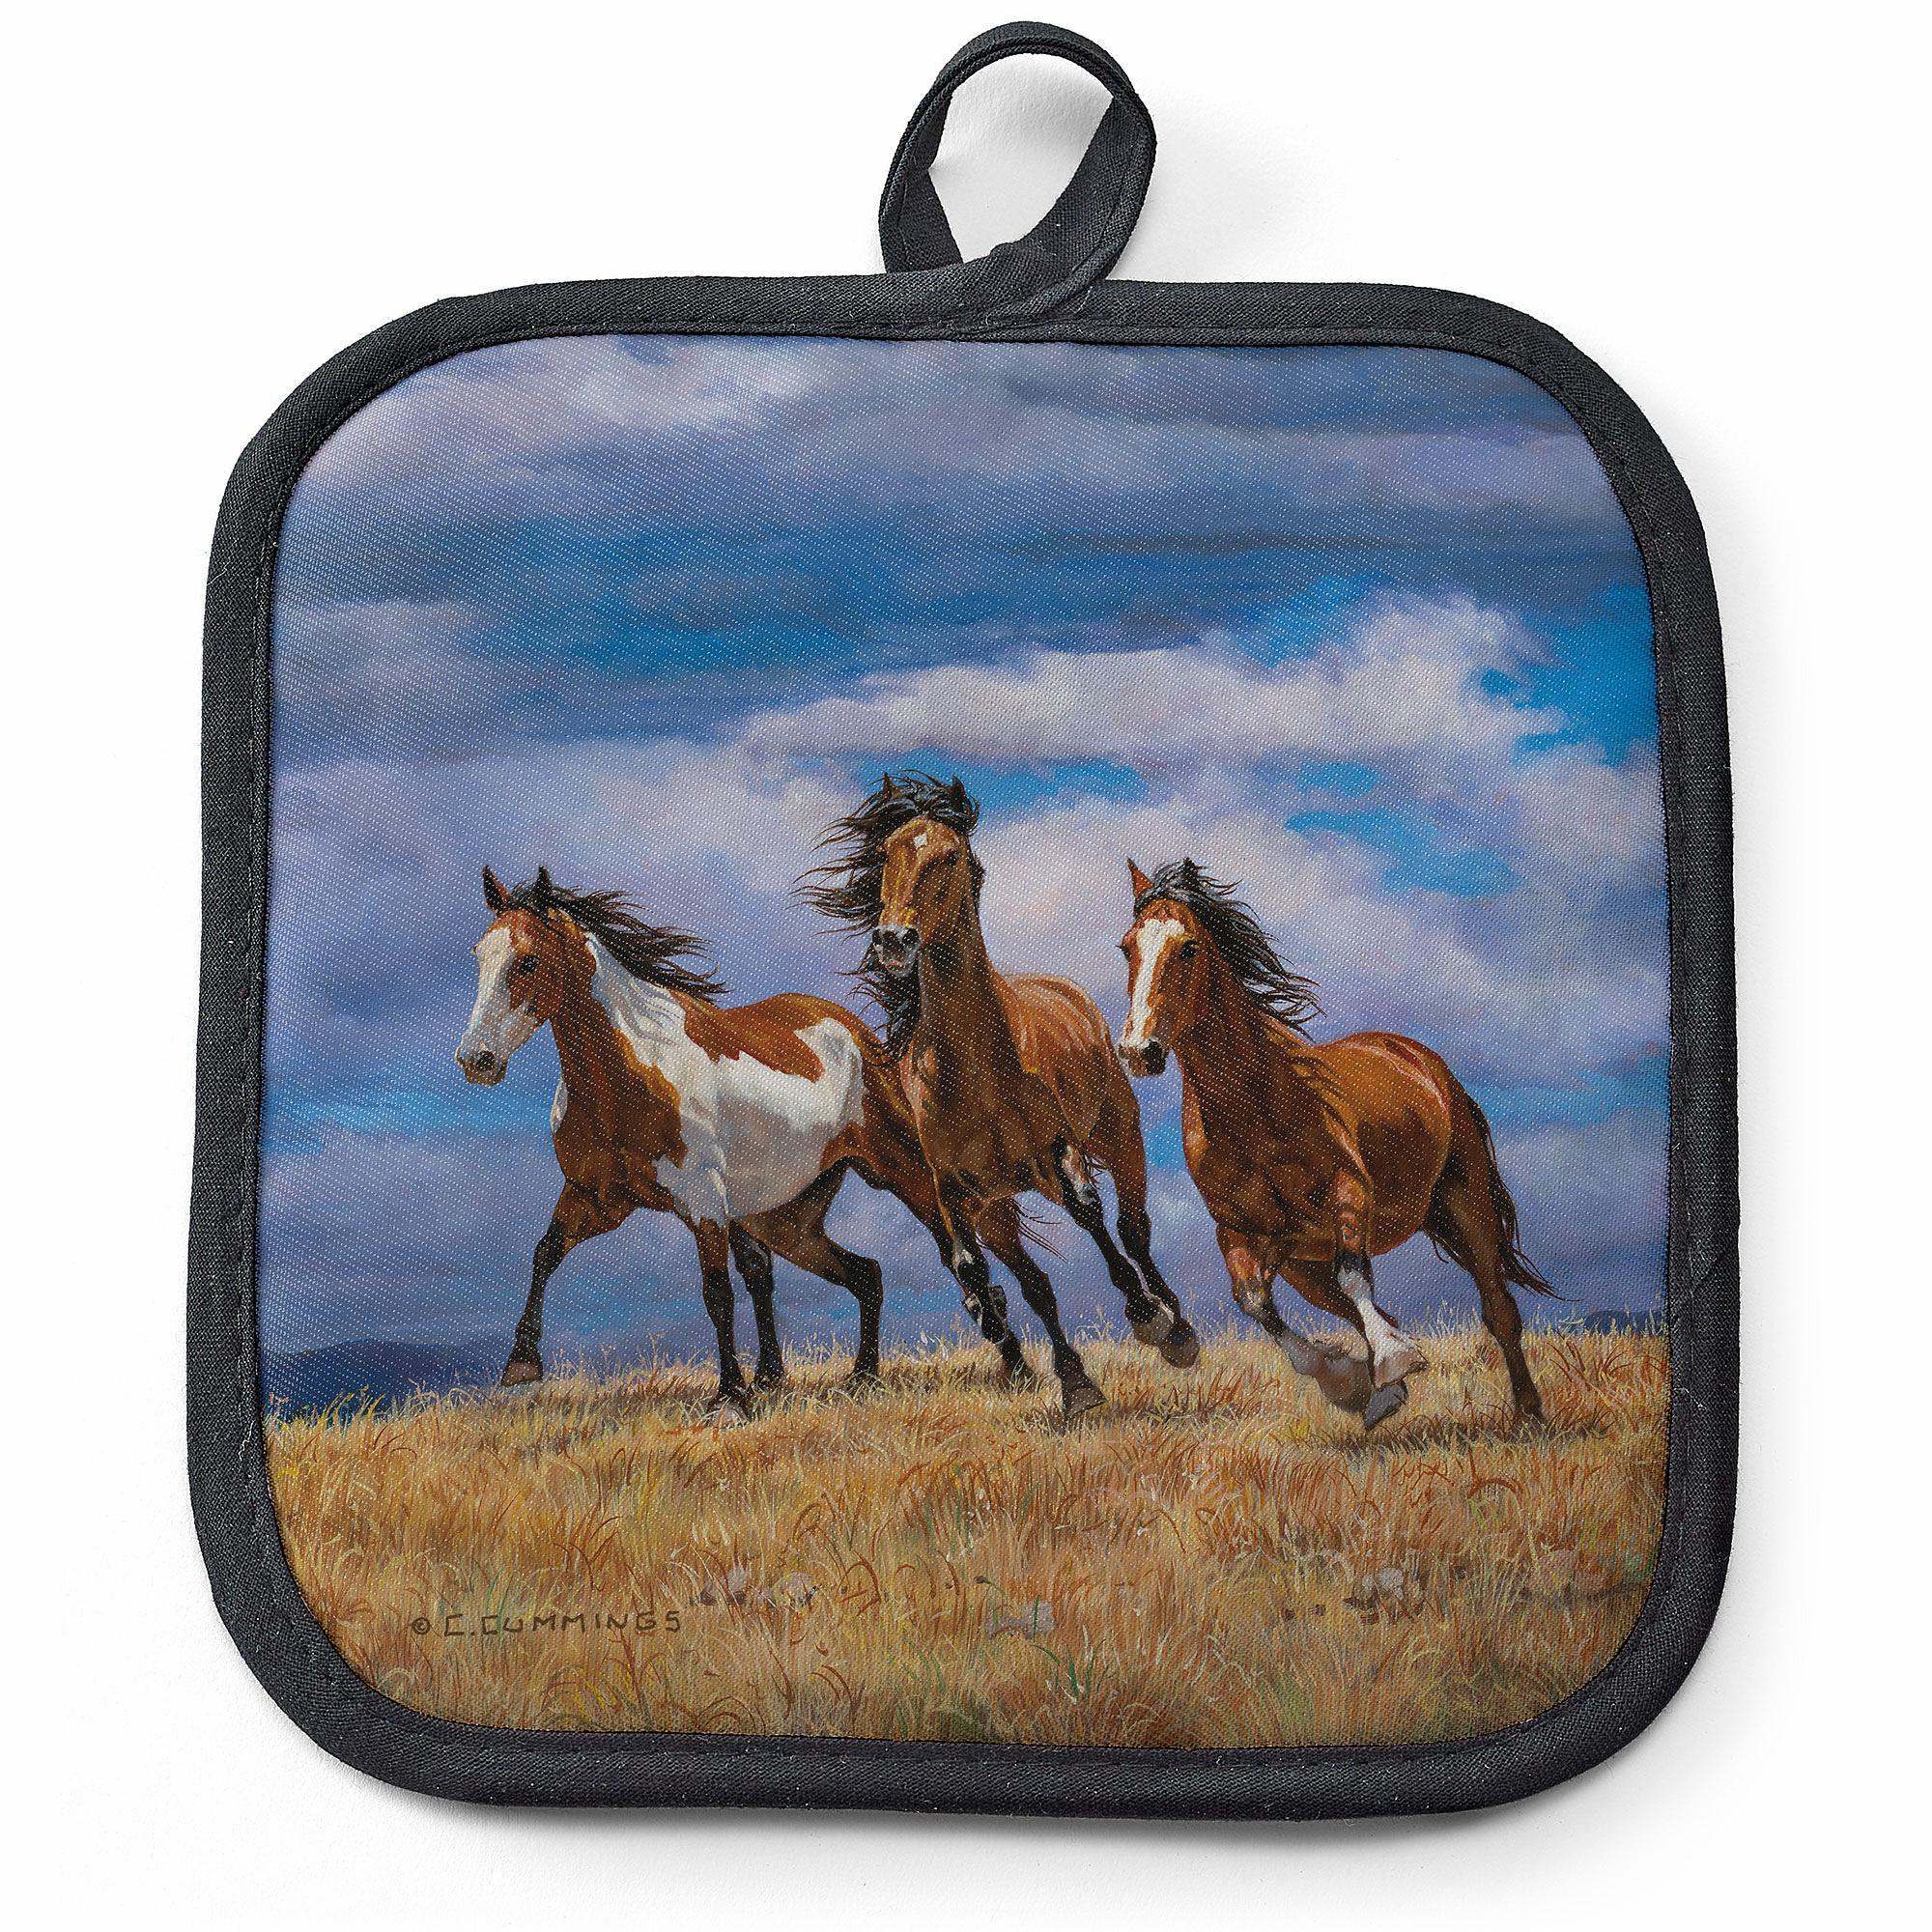 Over the Top - Horses Pot Holder - Wild Wings